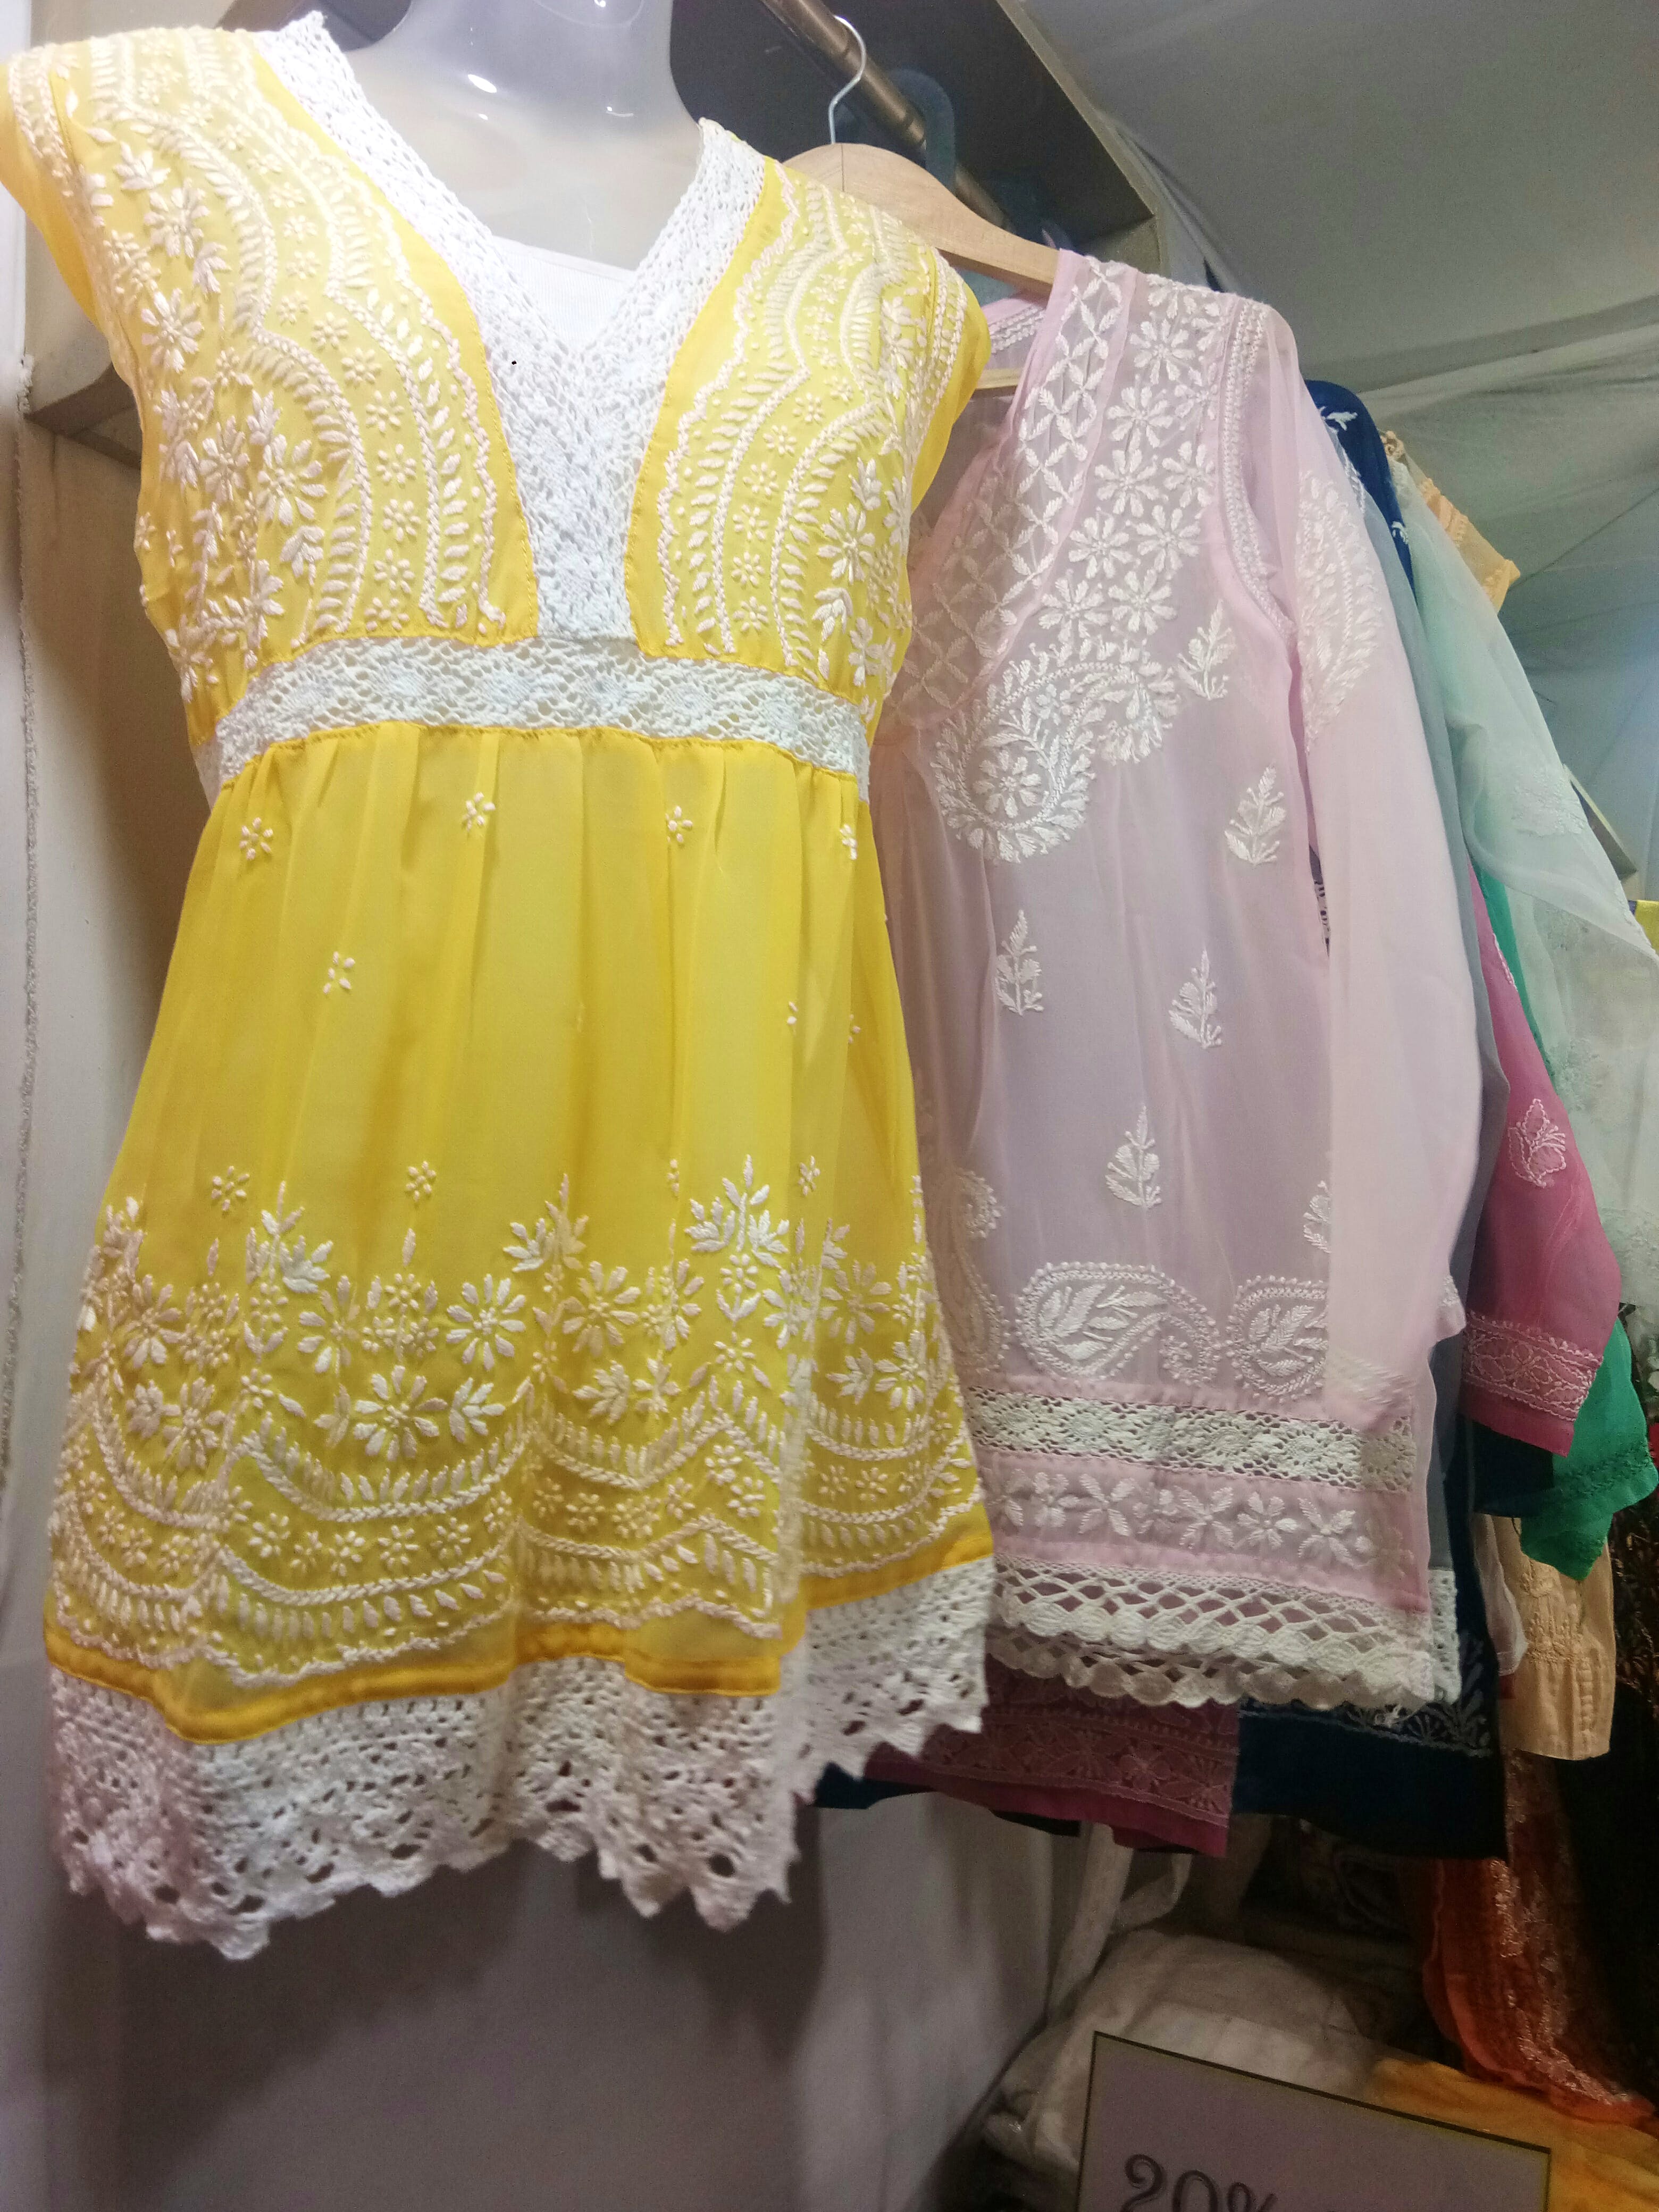 Clothing,Yellow,Dress,Lace,Formal wear,Fashion,Embroidery,Day dress,Textile,Boutique